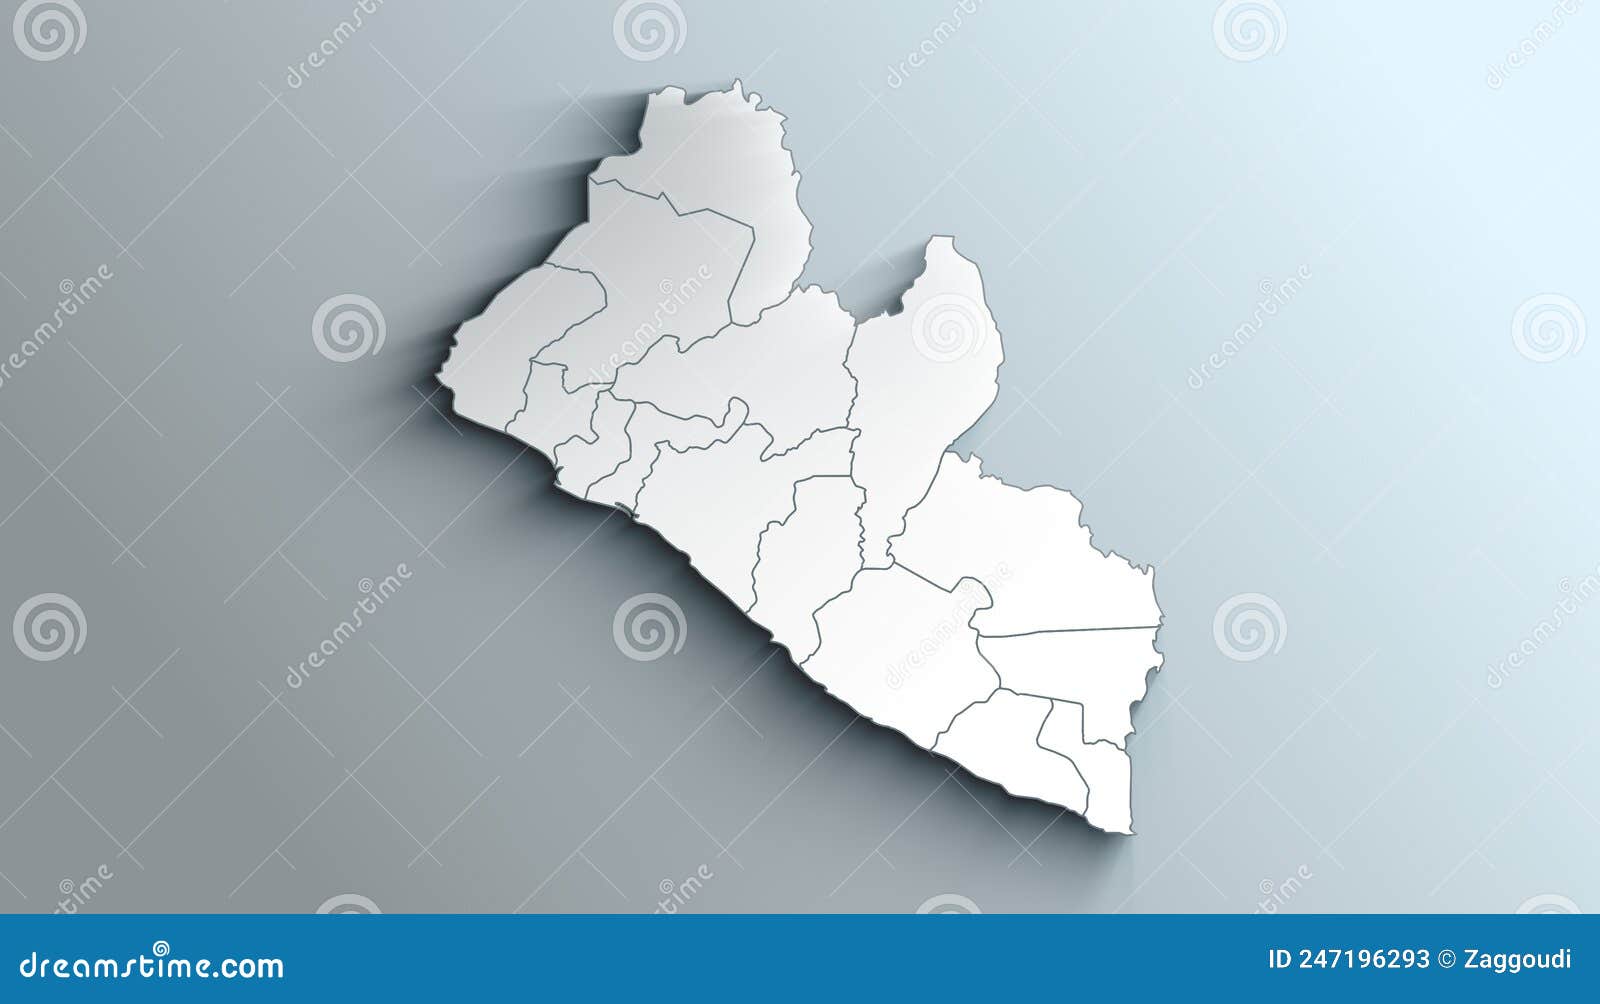 modern colorful map of liberia with counties with shadow